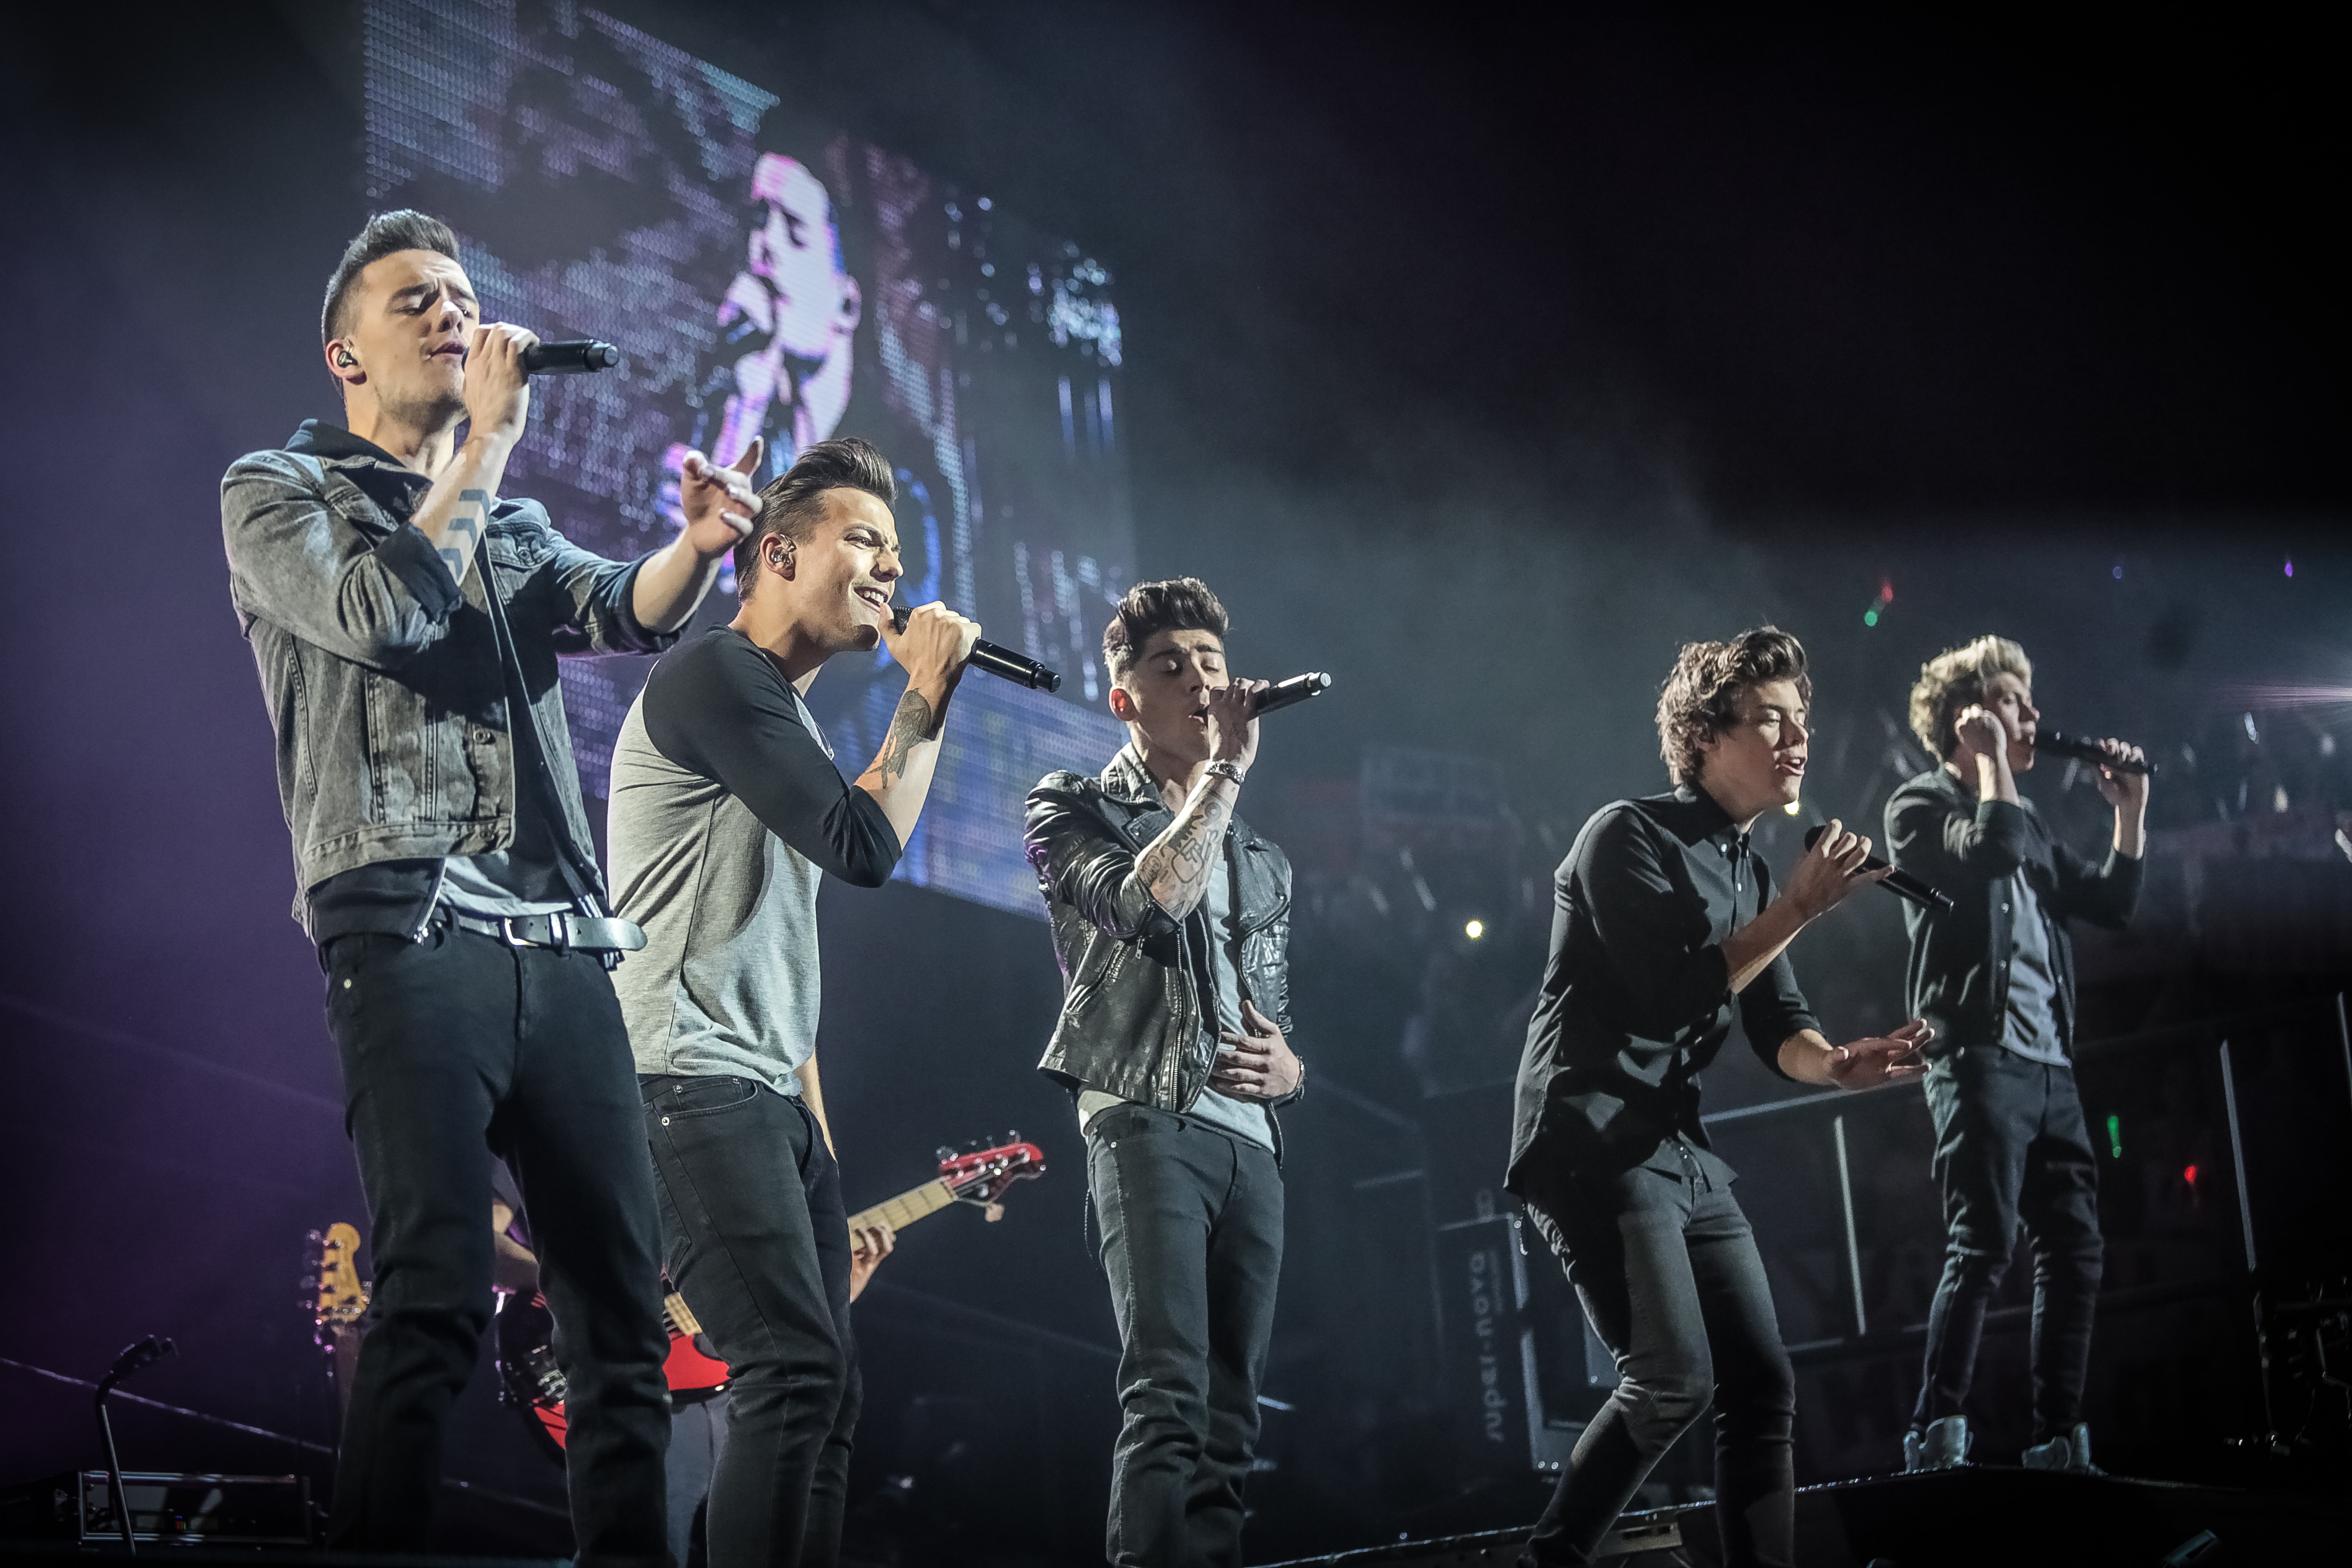 ONE DIRECTION: This Is Us - Photo By: Christie Goodwin Copyright: © 2013 TriStar Pictures. All Rights Reserved